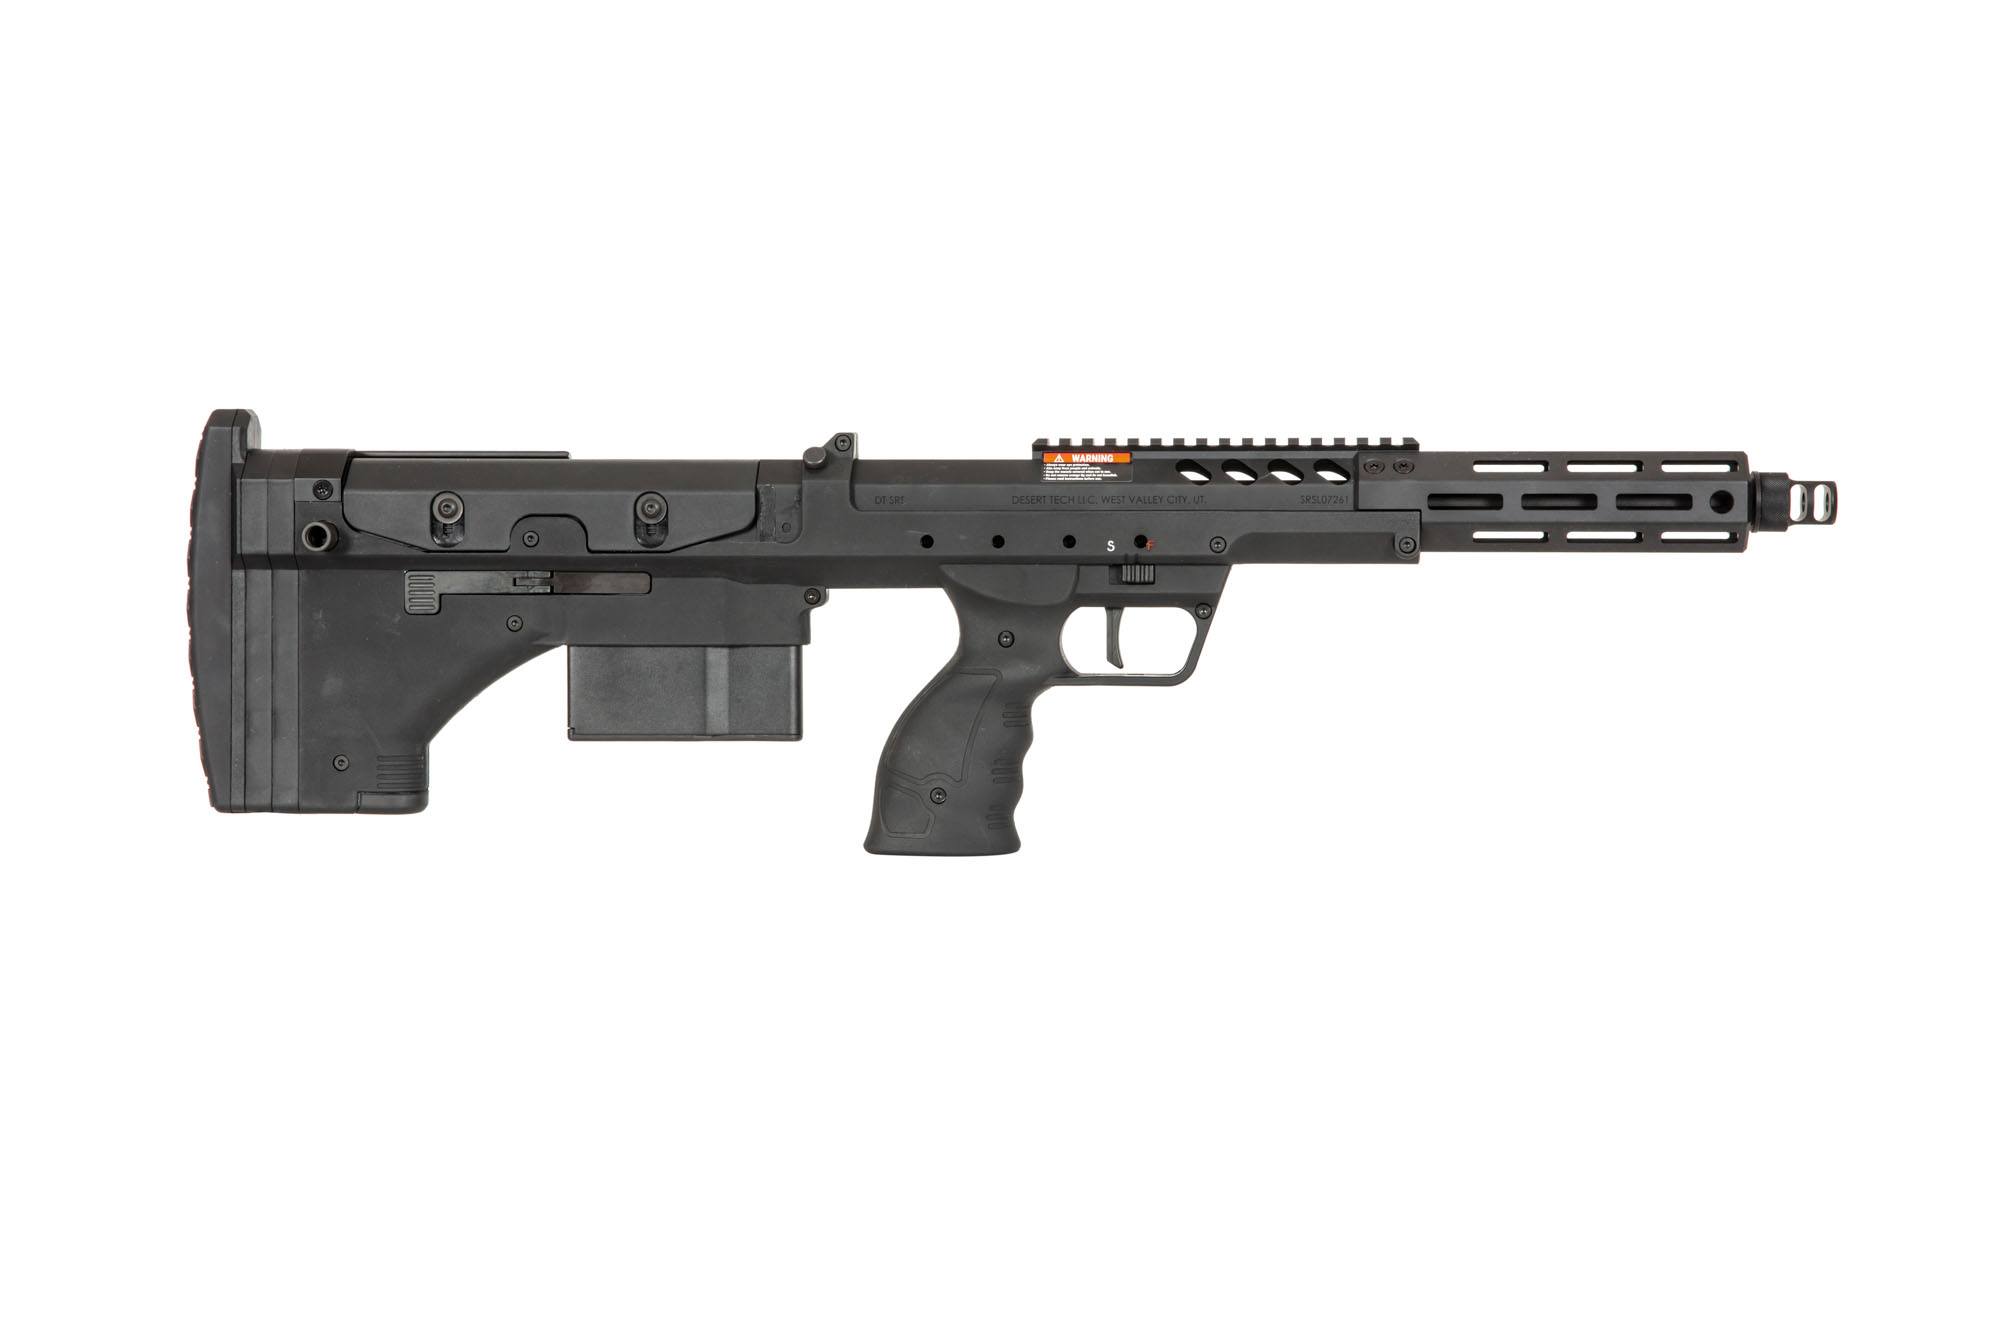 SRS-A2/M2 Covert 16* (Left-Handed) Desert Tech Sniper Rifle - Black by Silverback Airsoft on Airsoft Mania Europe